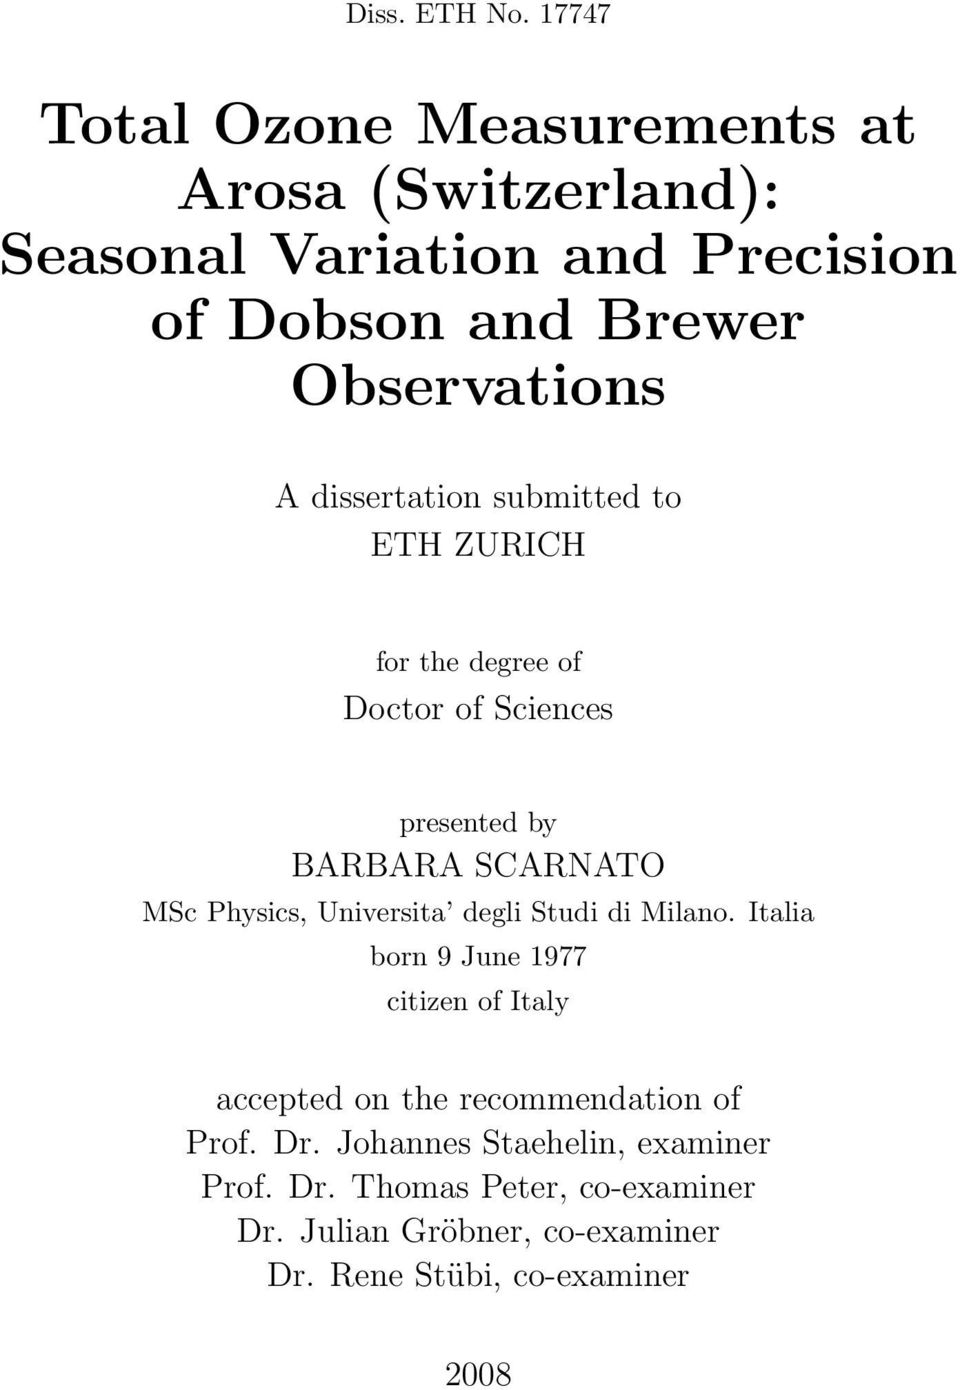 dissertation submitted to ETH ZURICH for the degree of Doctor of Sciences presented by BARBARA SCARNATO MSc Physics,